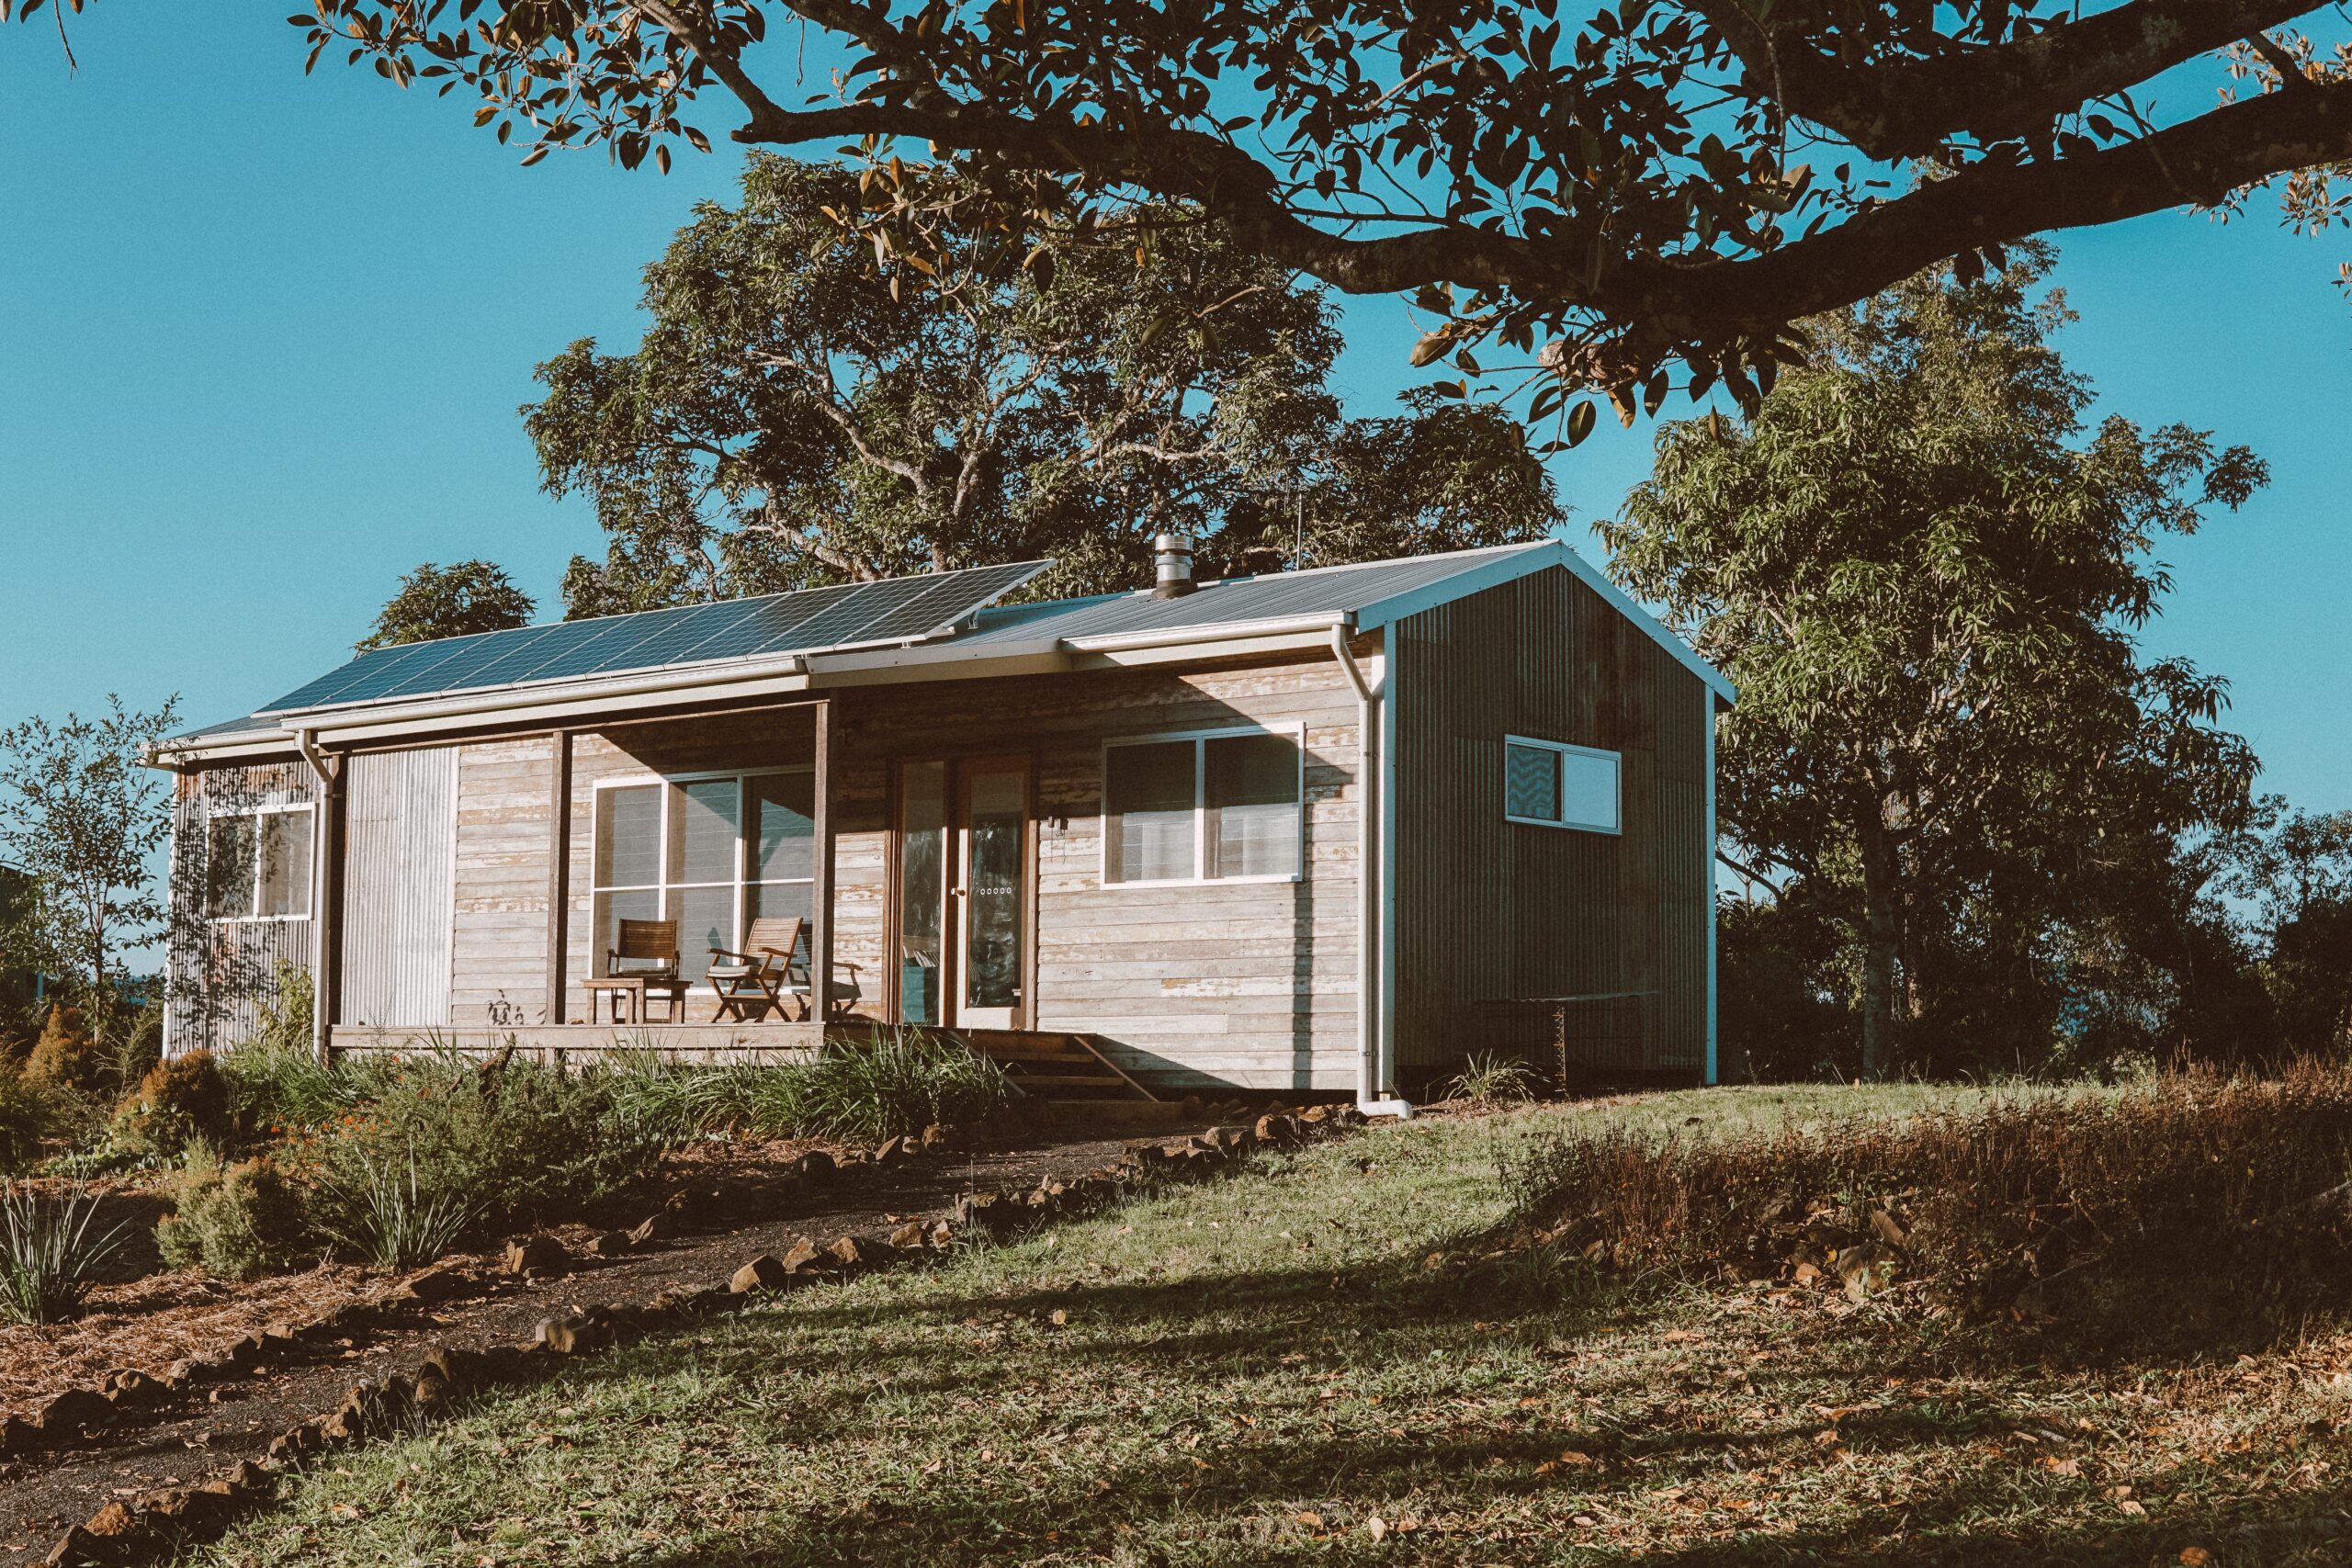 The Advantages of Having a Sustainable Granny Flat